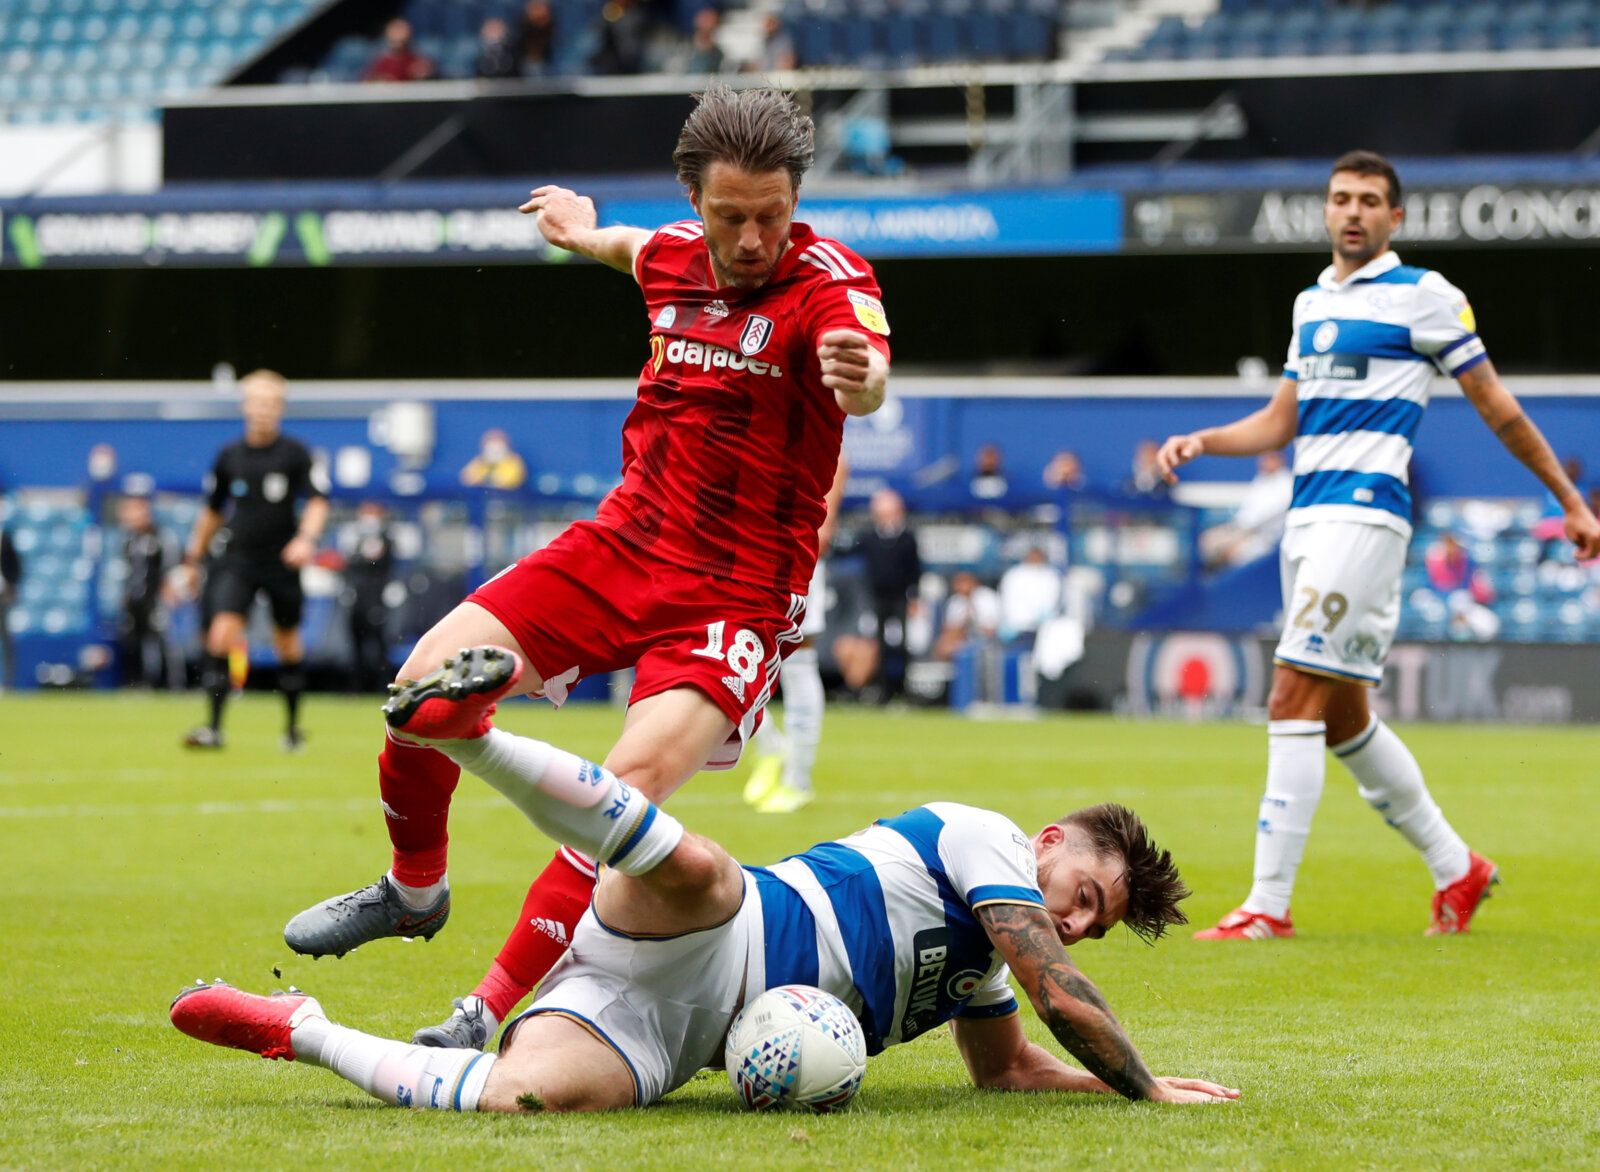 Soccer Football - Championship - Queens Park Rangers v Fulham - Loftus Road, London, Britain - June 30, 2020  QPR’s Ryan Manning in action with Fulham’s Harry Arter, as play resumes behind closed doors following the outbreak of the coronavirus disease (COVID-19)  Action Images/Paul Childs  EDITORIAL USE ONLY. No use with unauthorized audio, video, data, fixture lists, club/league logos or 